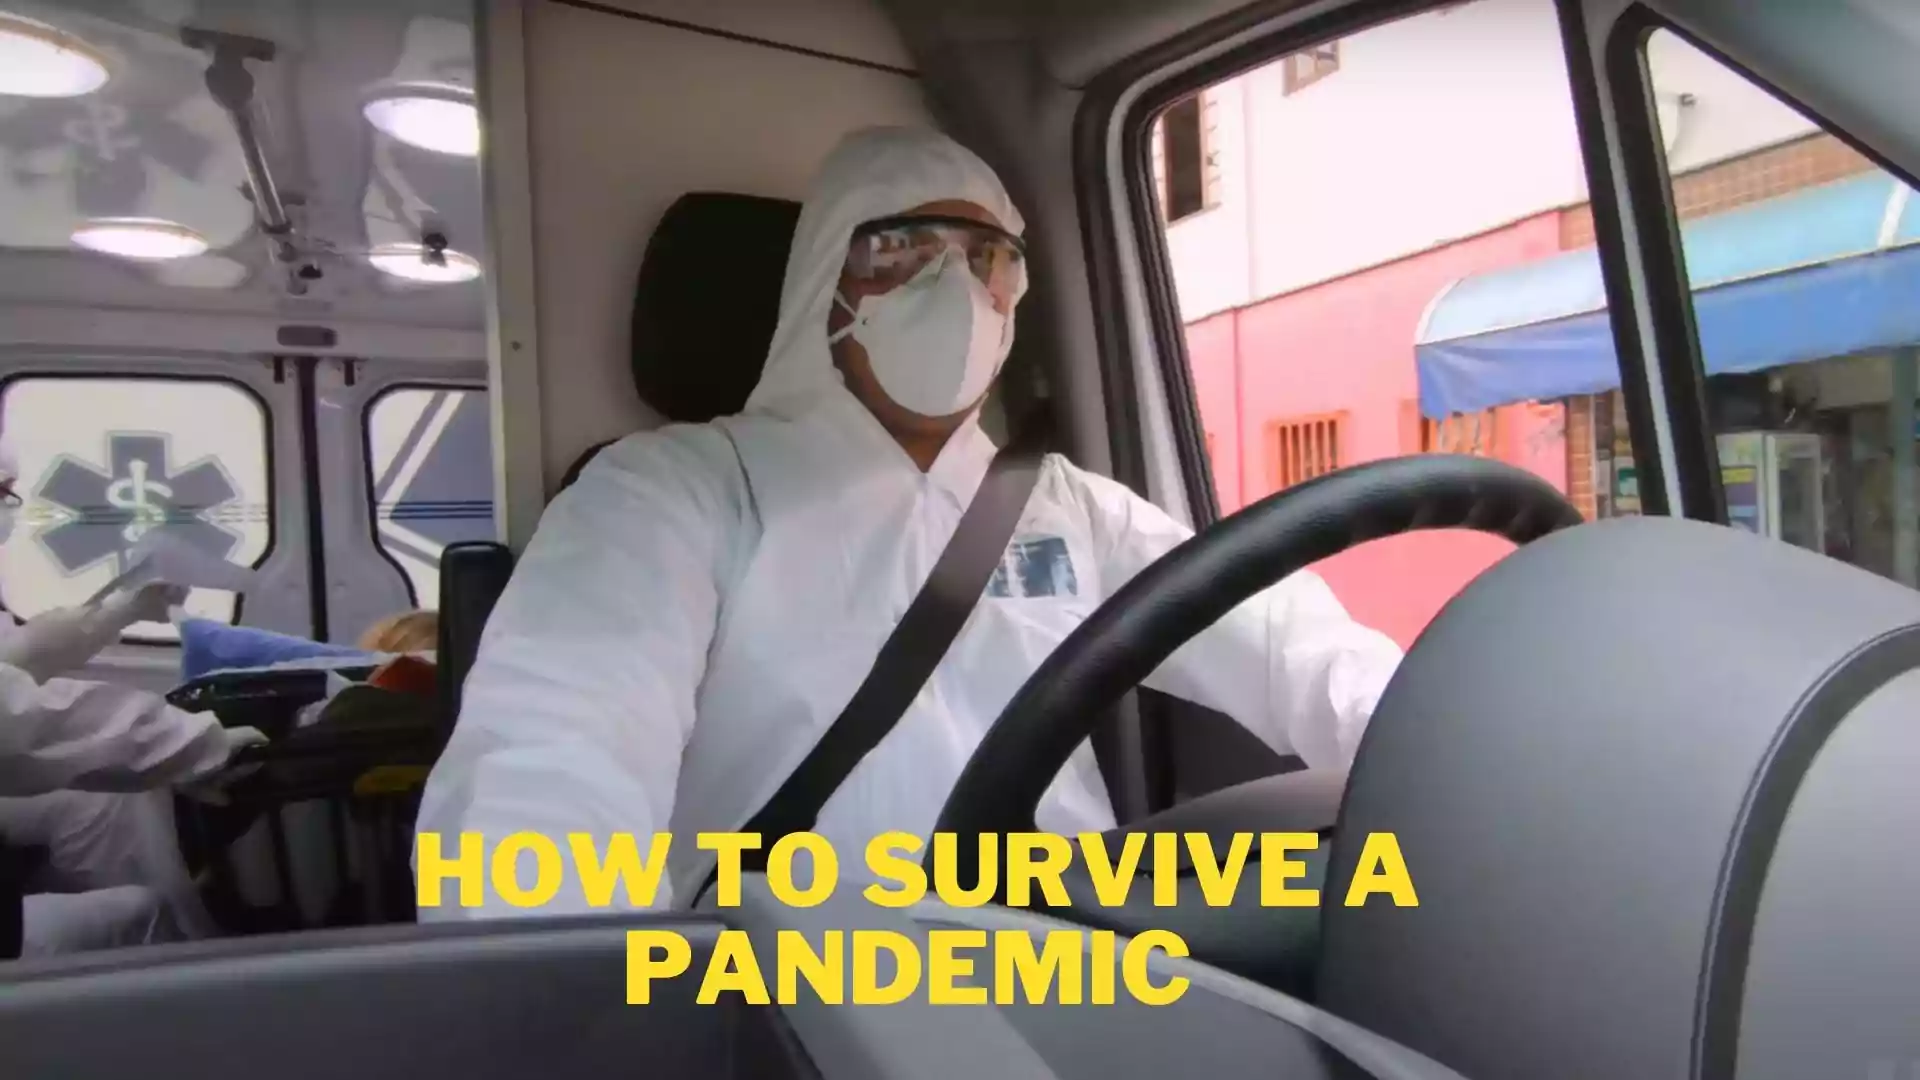 How to Survive a Pandemic Wallpaper and Image